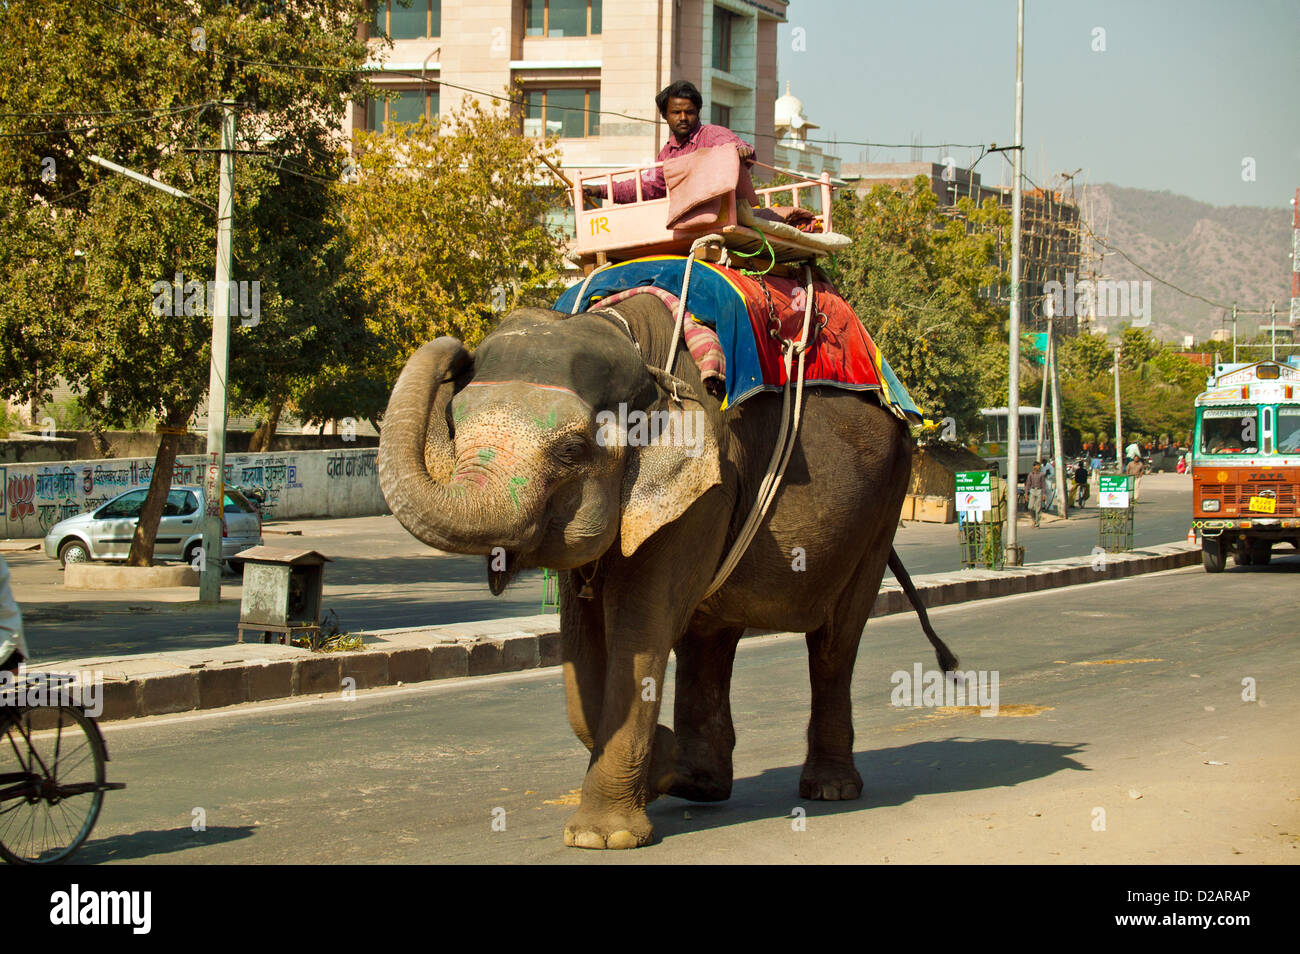 AN ELEPHANT MAKES ITS WAY ALONG A BUSY MAIN ROAD IN JAIPUR INDIA Stock Photo